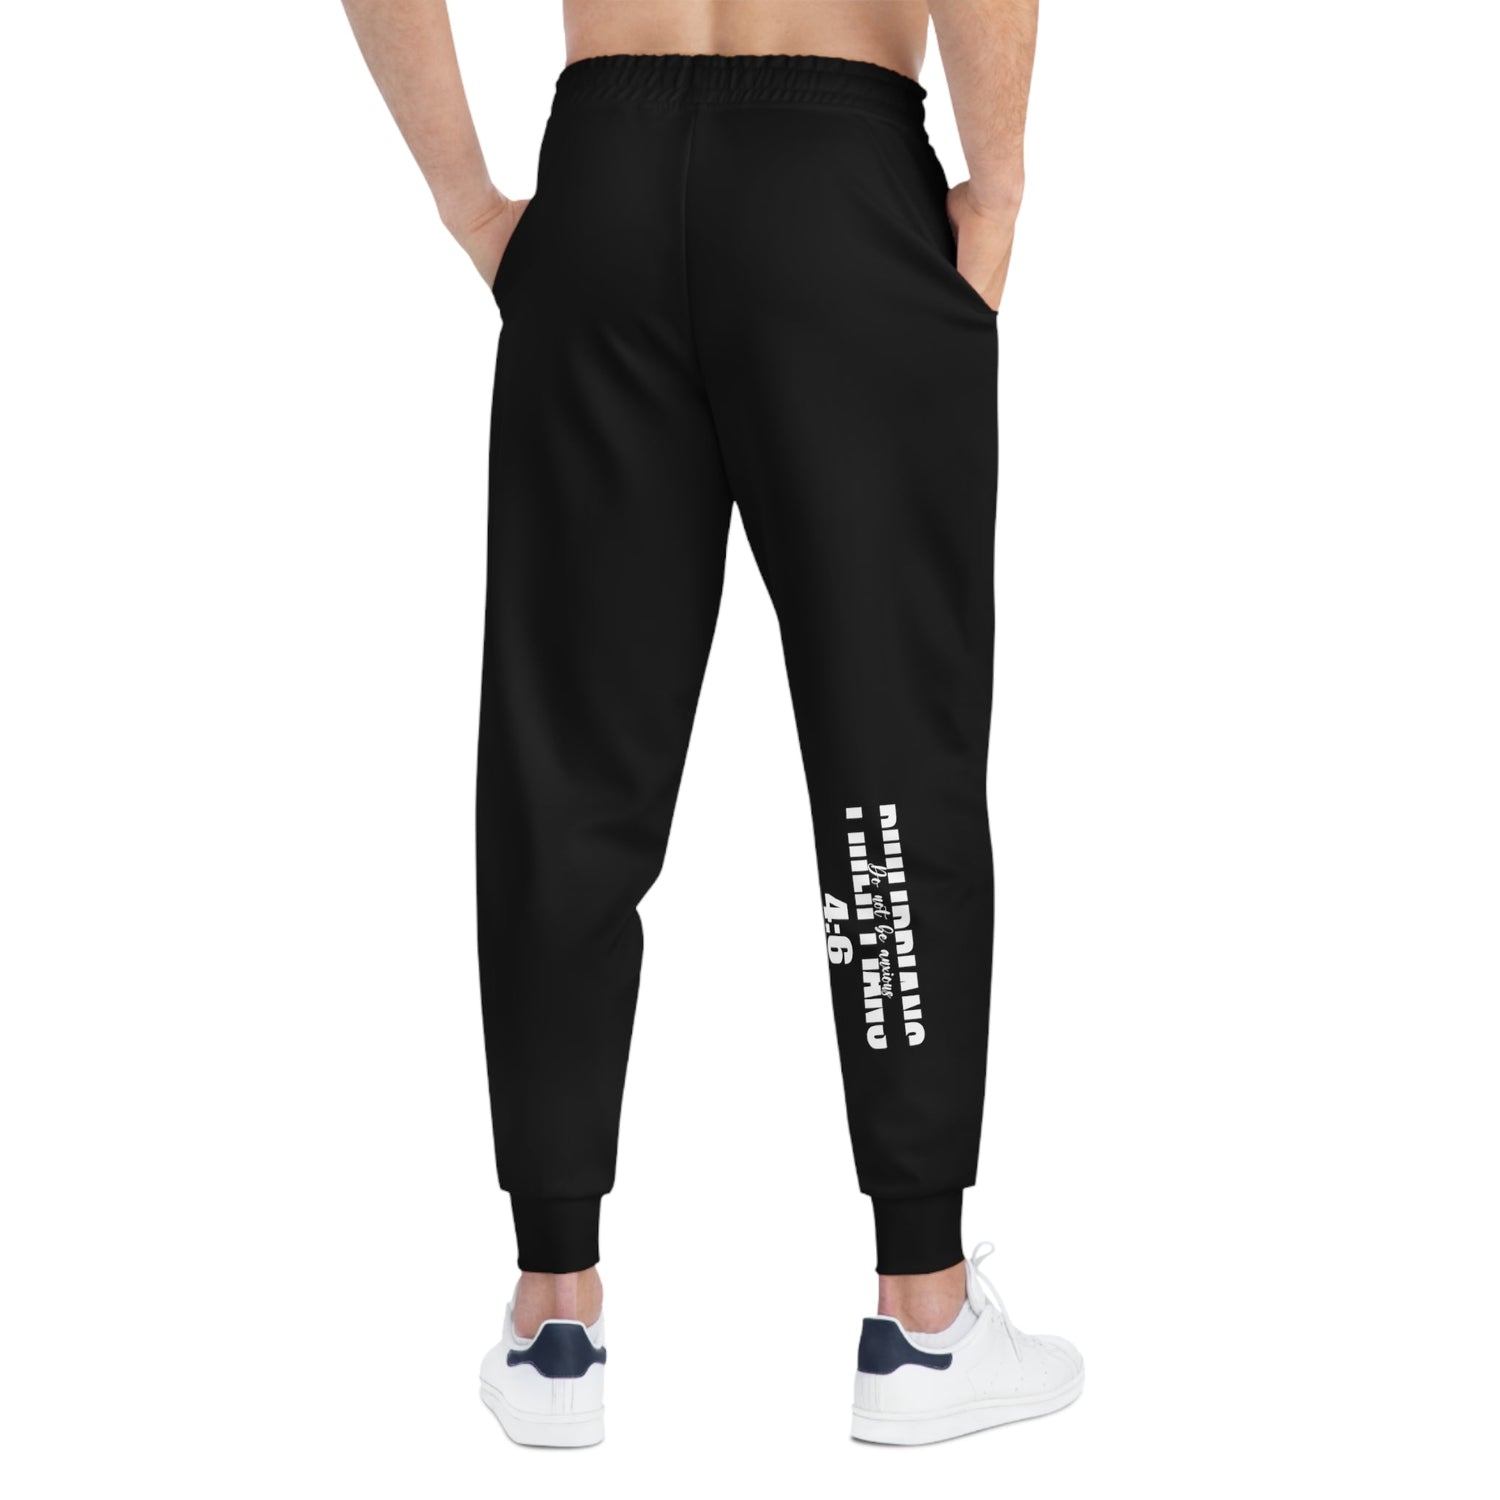 Do Not be Anxious Black Unisex Athletic Joggers-All Over Prints-Wear What Inspires You